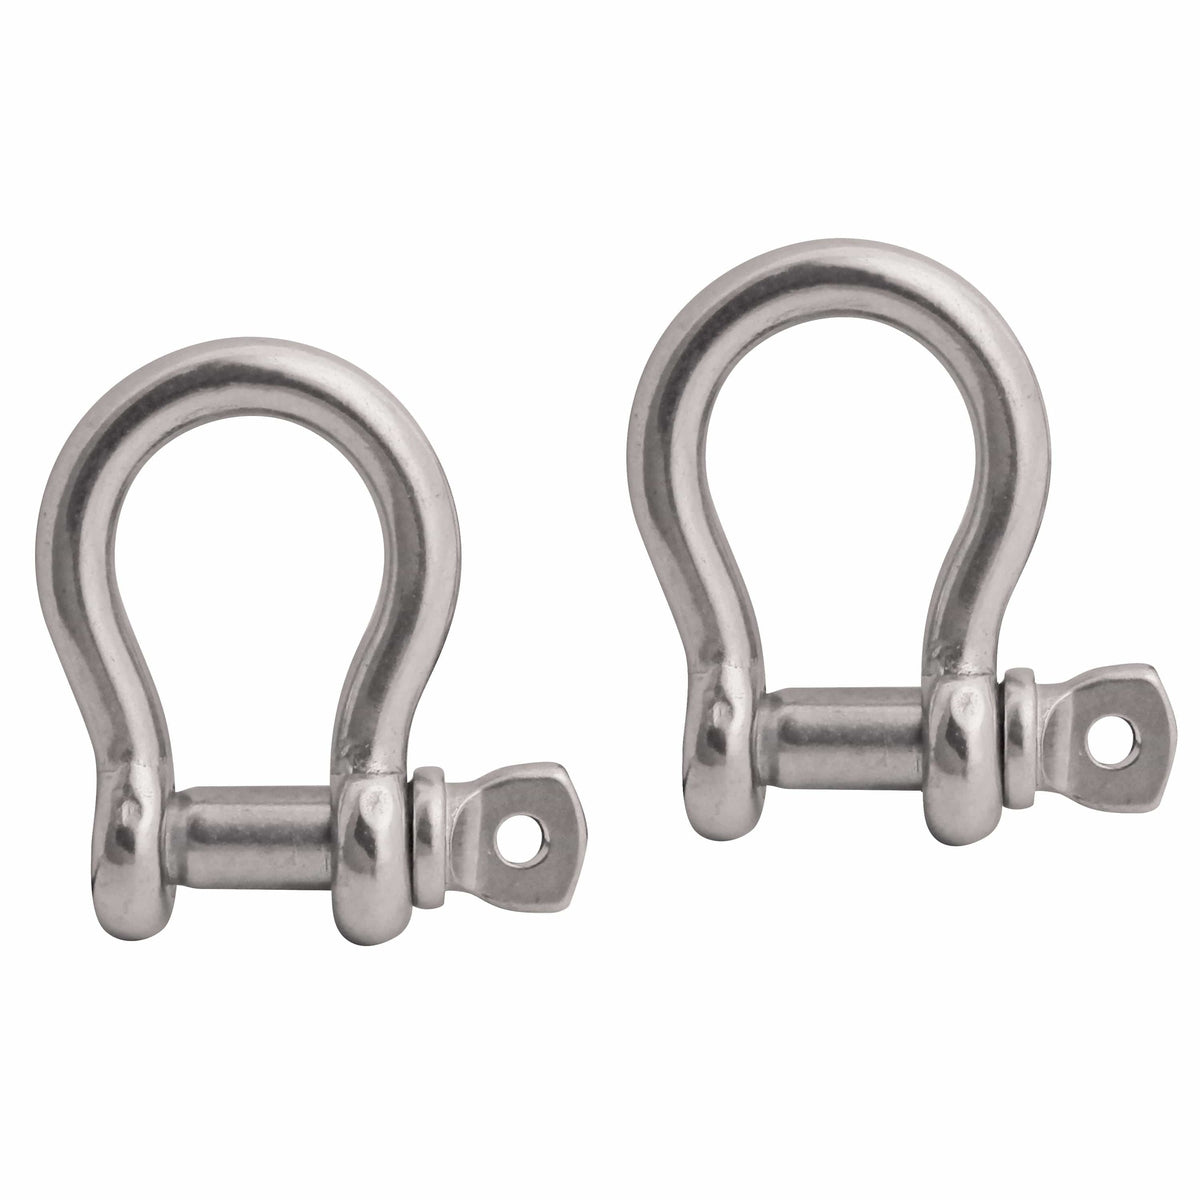 Extreme Max BoatTector SS Marine Anchor Shackle 1/4" #3006.6611